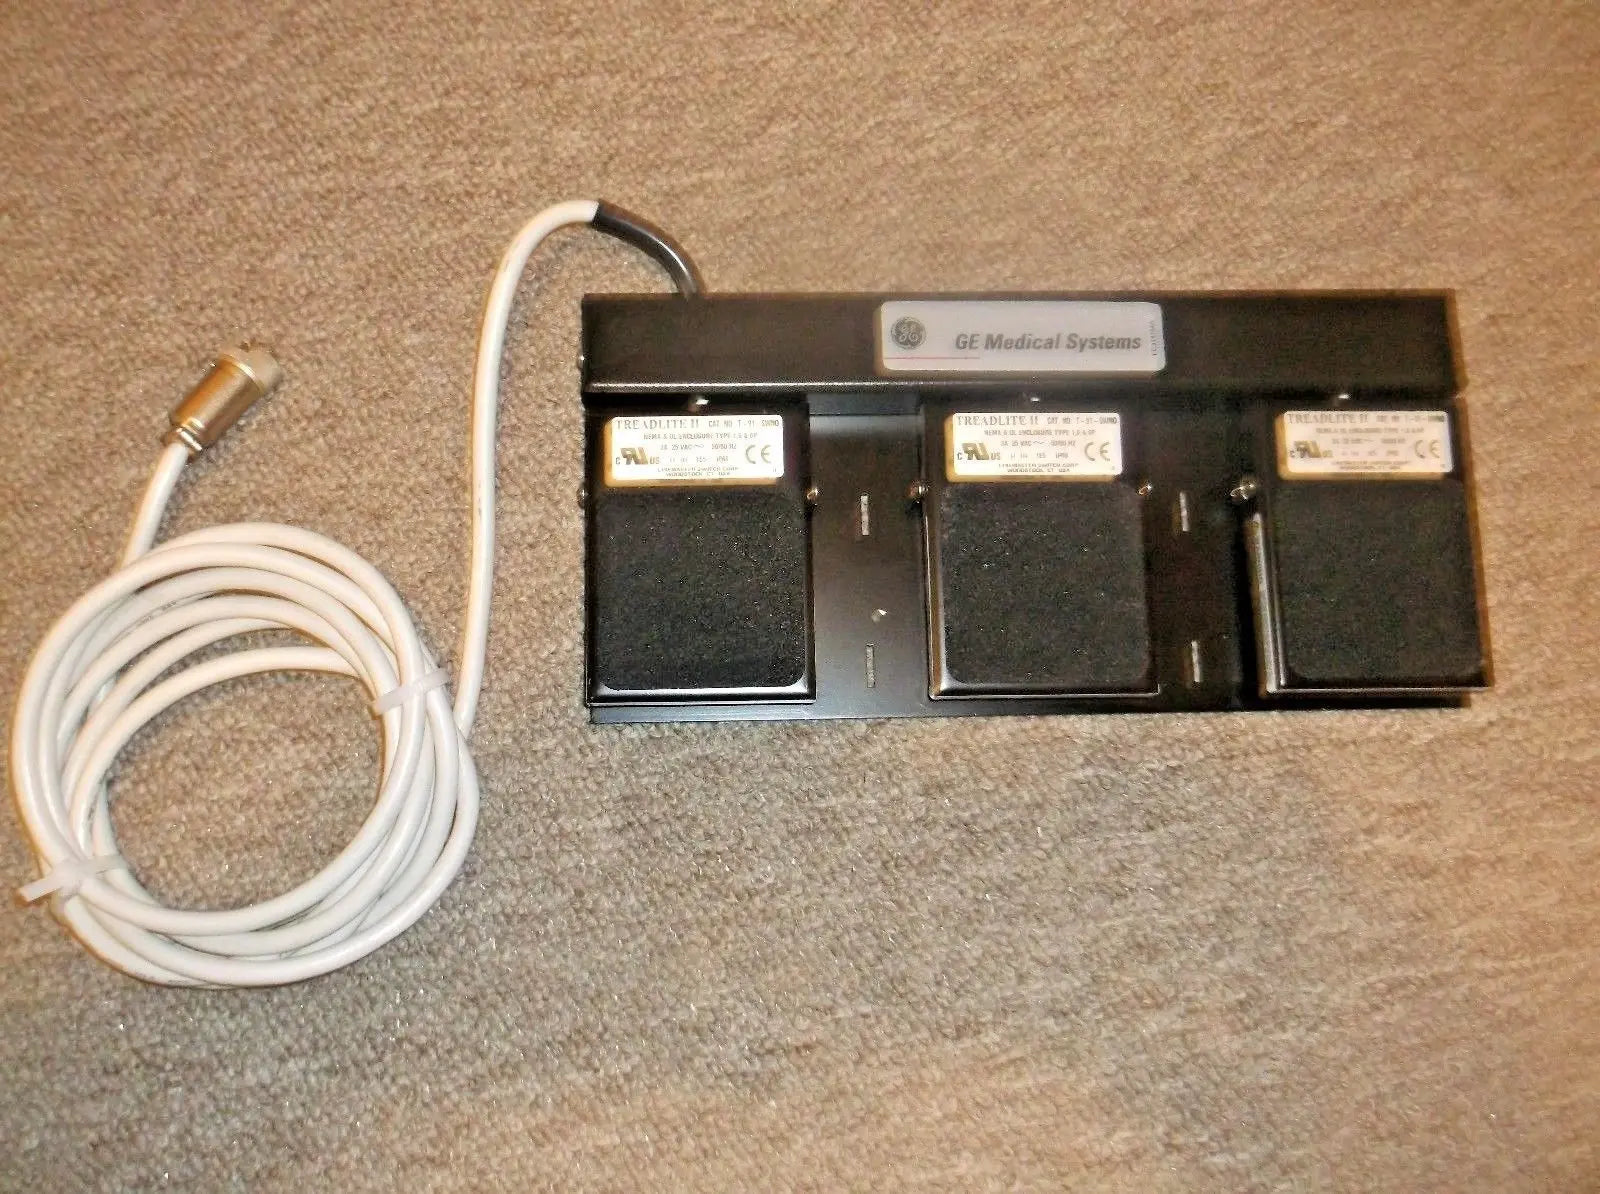 GE FB200952 Medical Ultrasound Foot Switch Pedal Unit For Vivid 7 System DIAGNOSTIC ULTRASOUND MACHINES FOR SALE